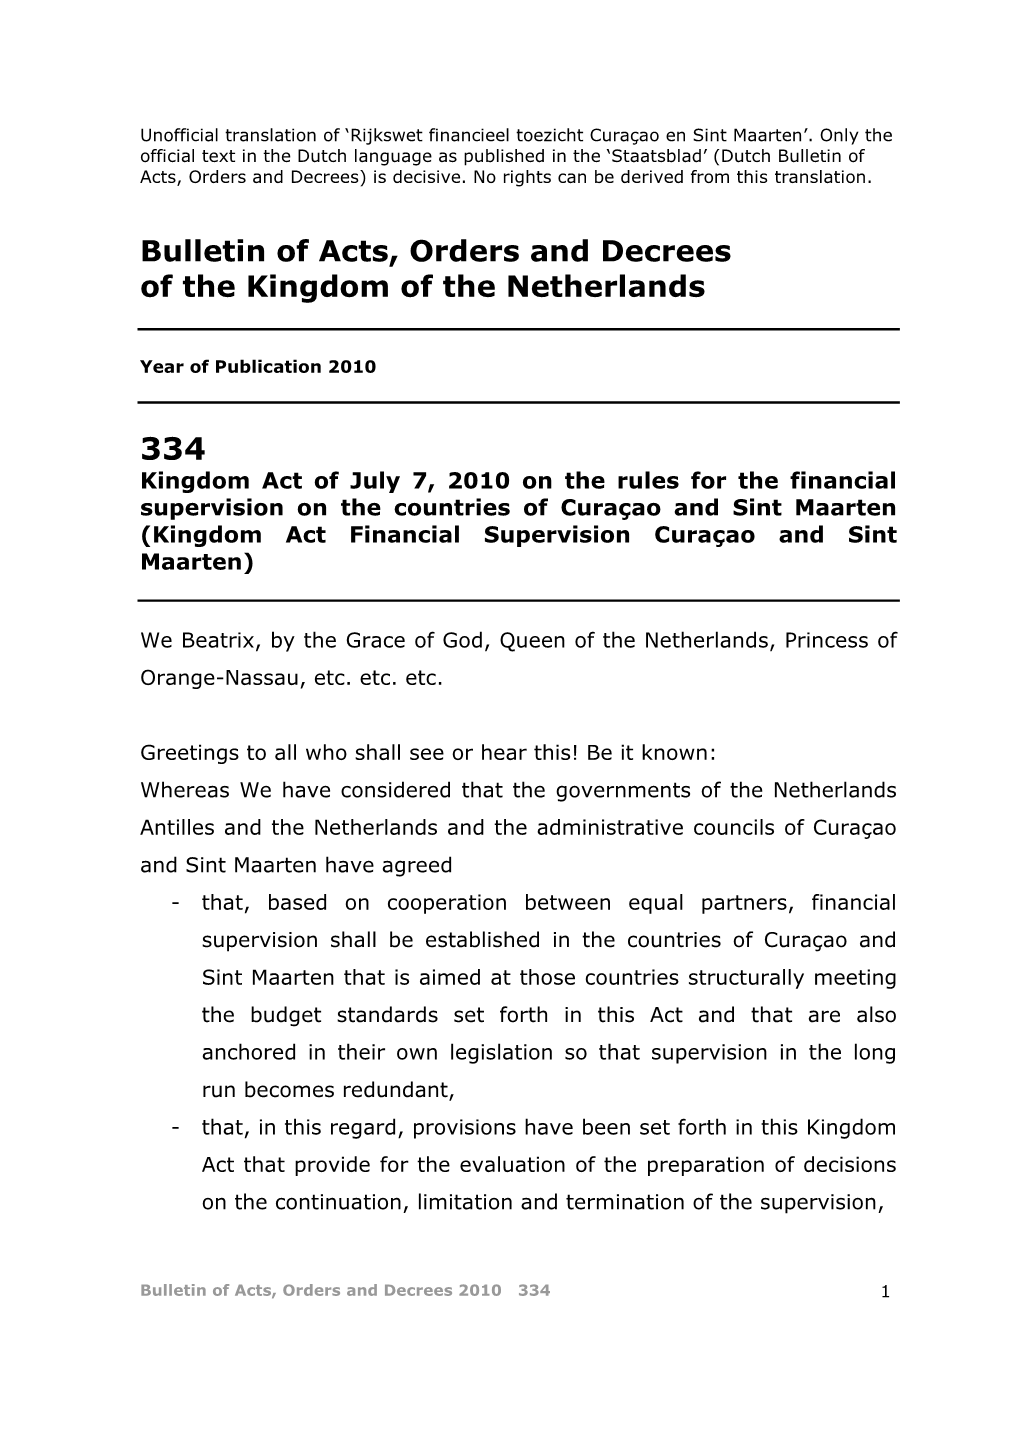 Bulletin of Acts, Orders and Decrees of the Kingdom of the Netherlands